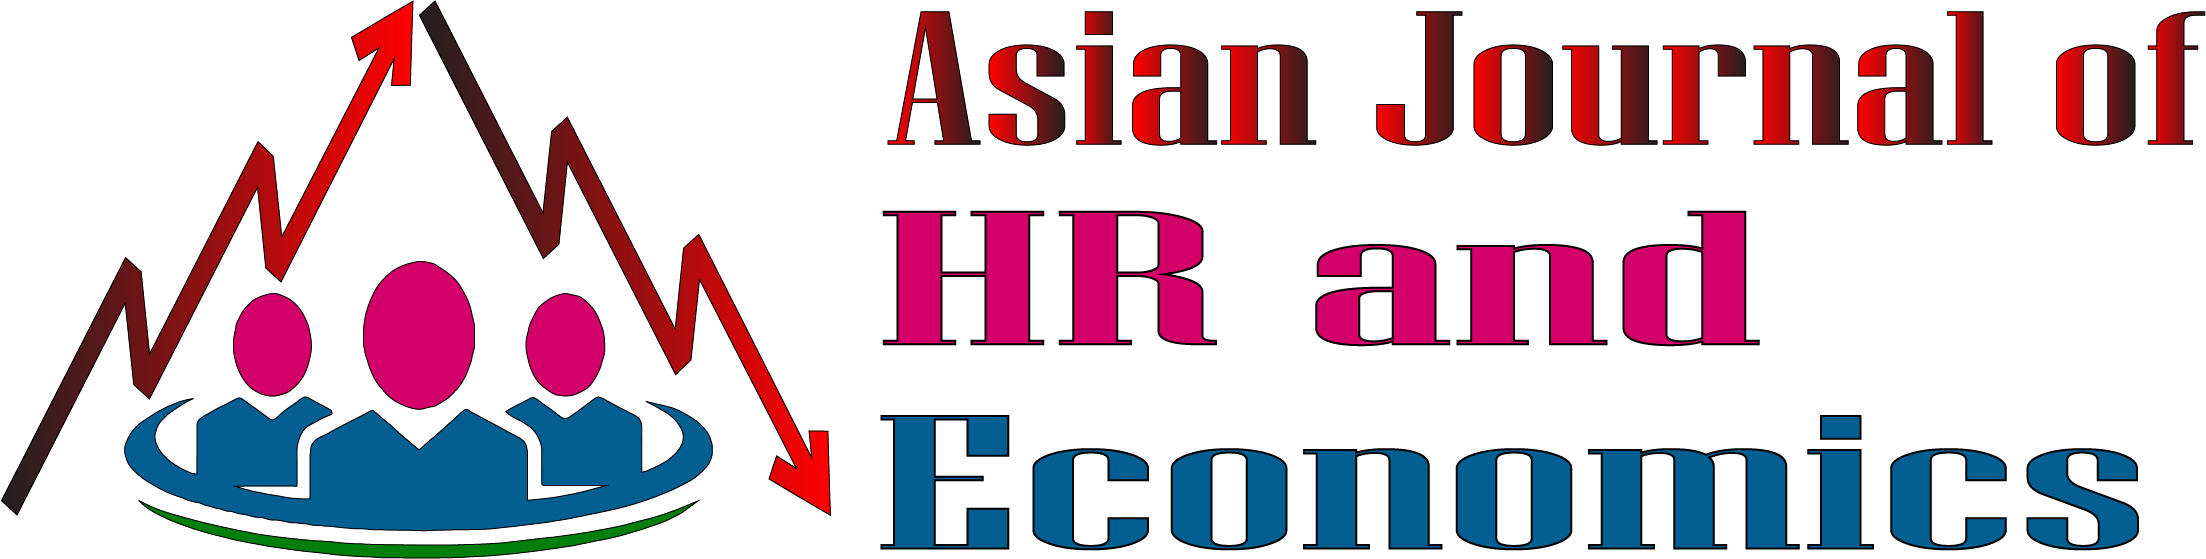 Asian Journal of HR and Economics (AJHRE)